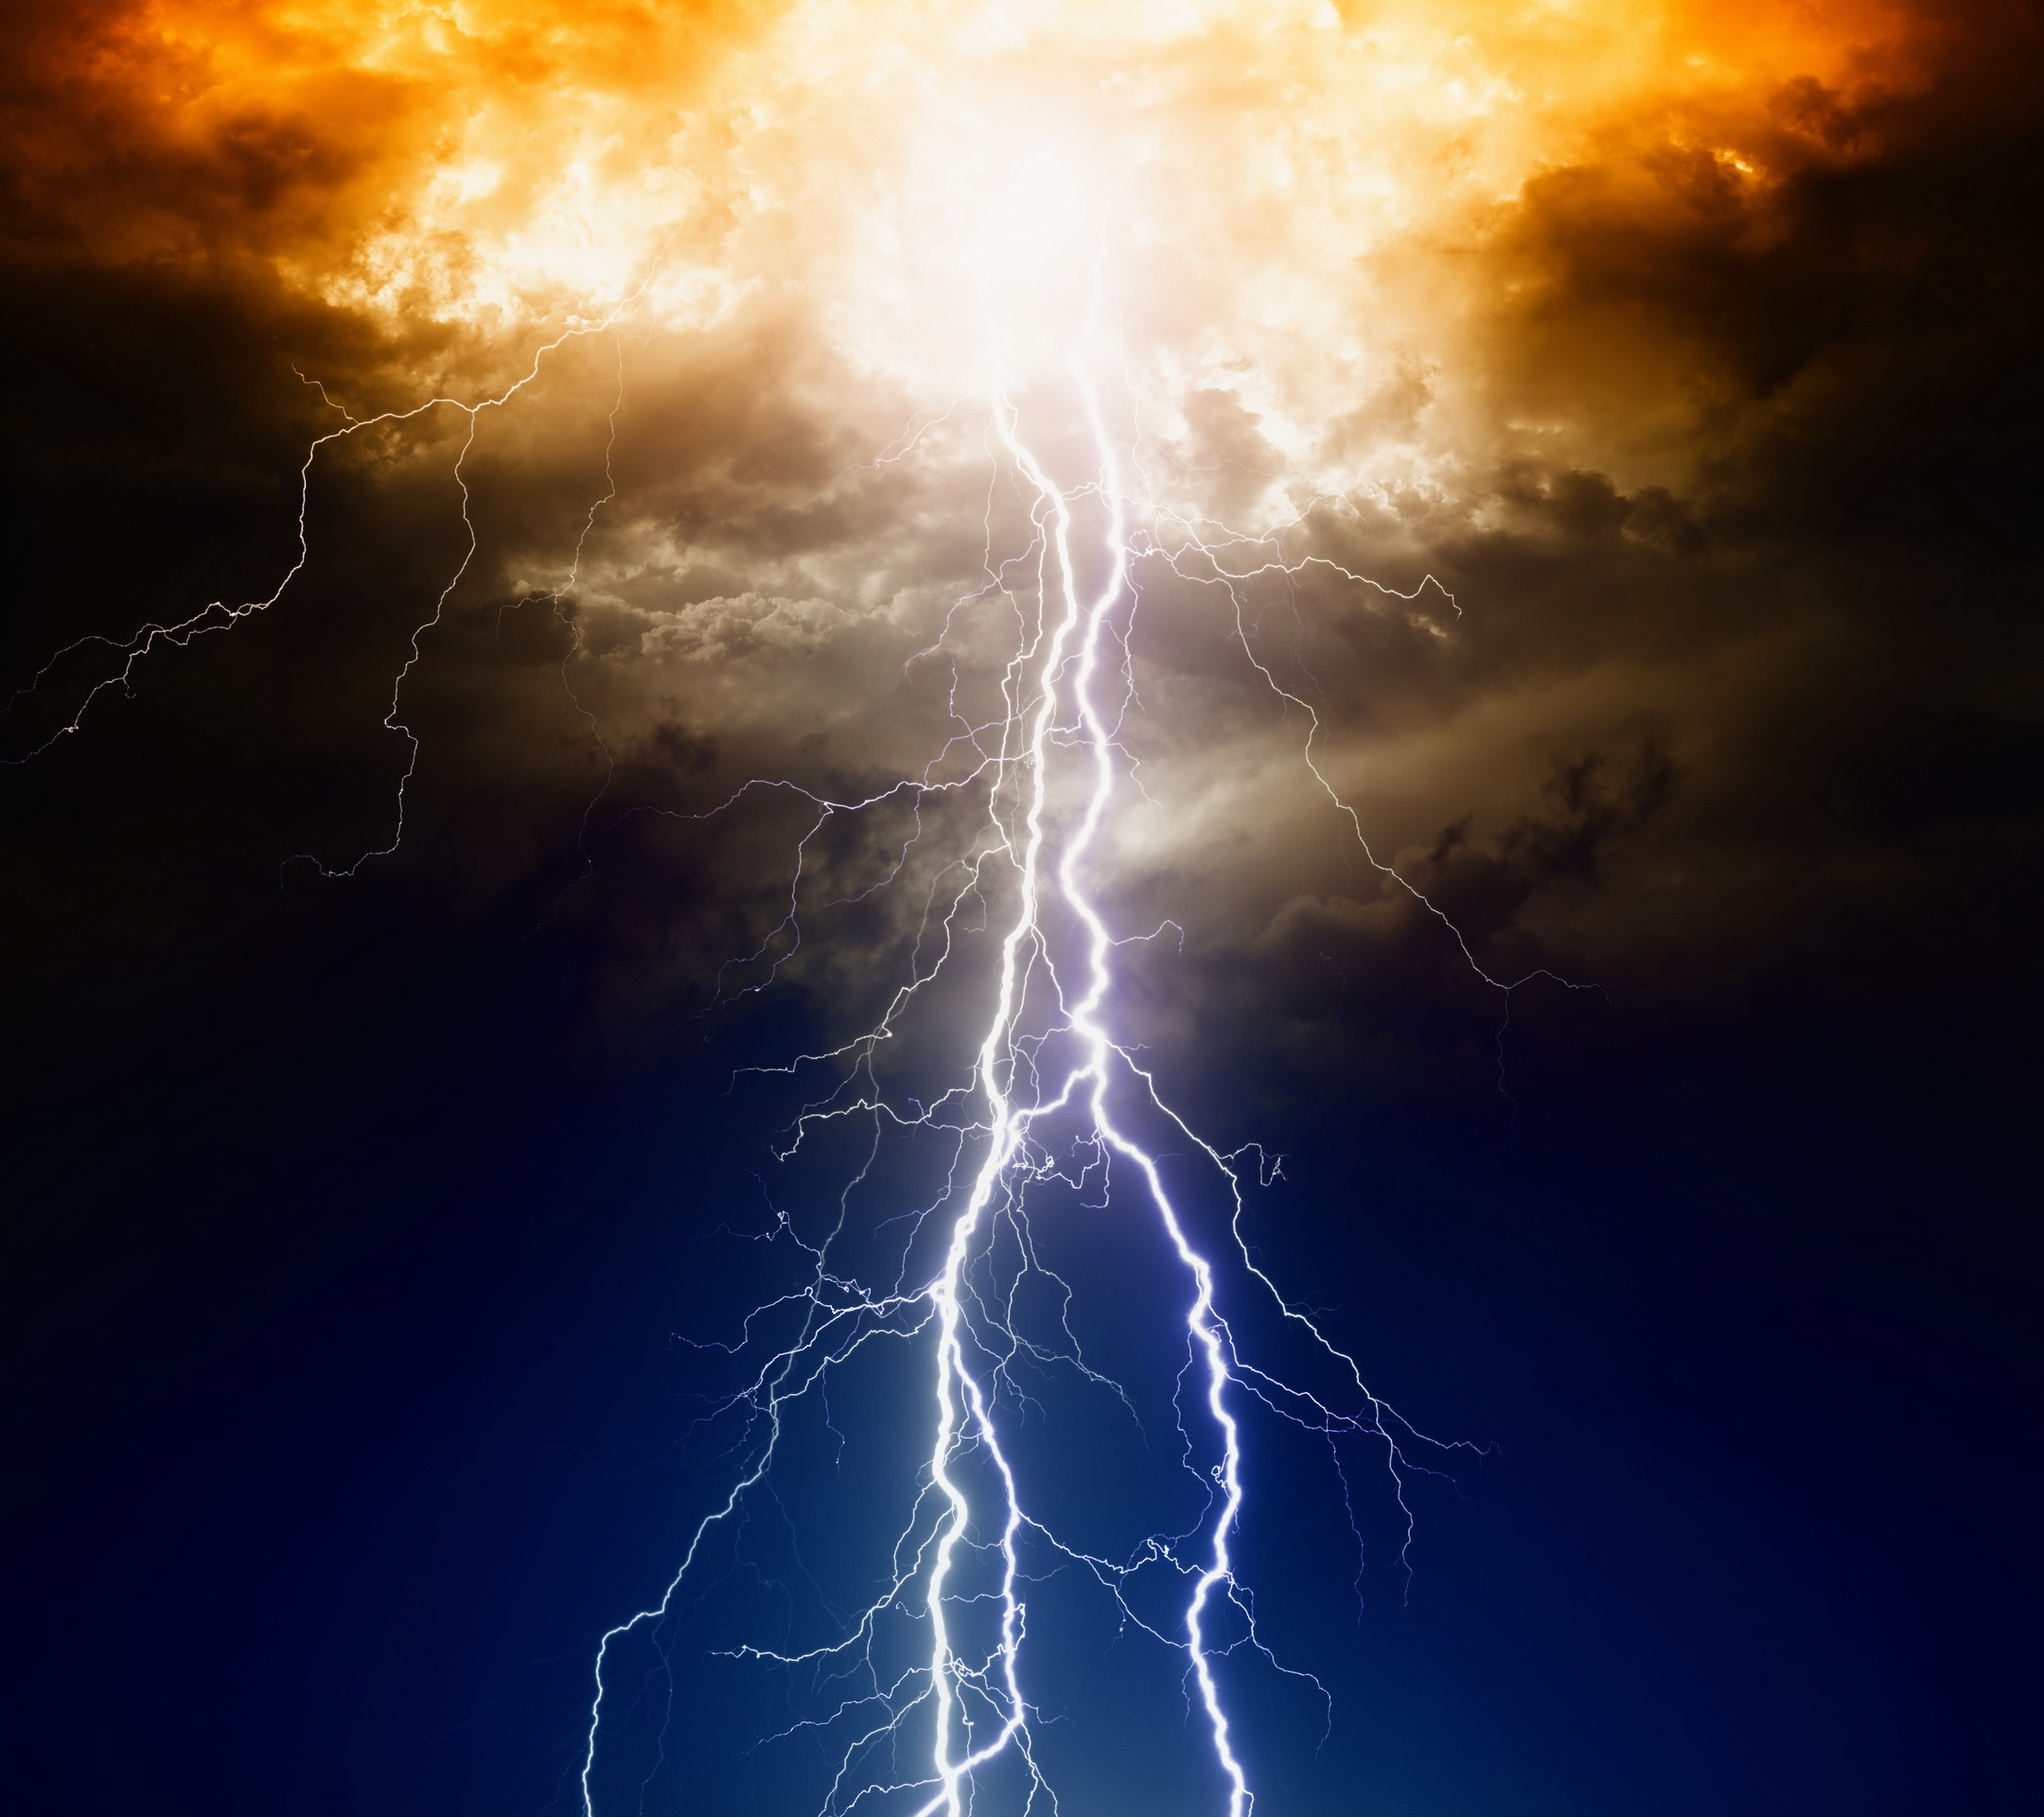 2160x1920 Lightning 2160 x 1920 Wallpapers - nature lightning sky dramatic storm. Tap  to see 18